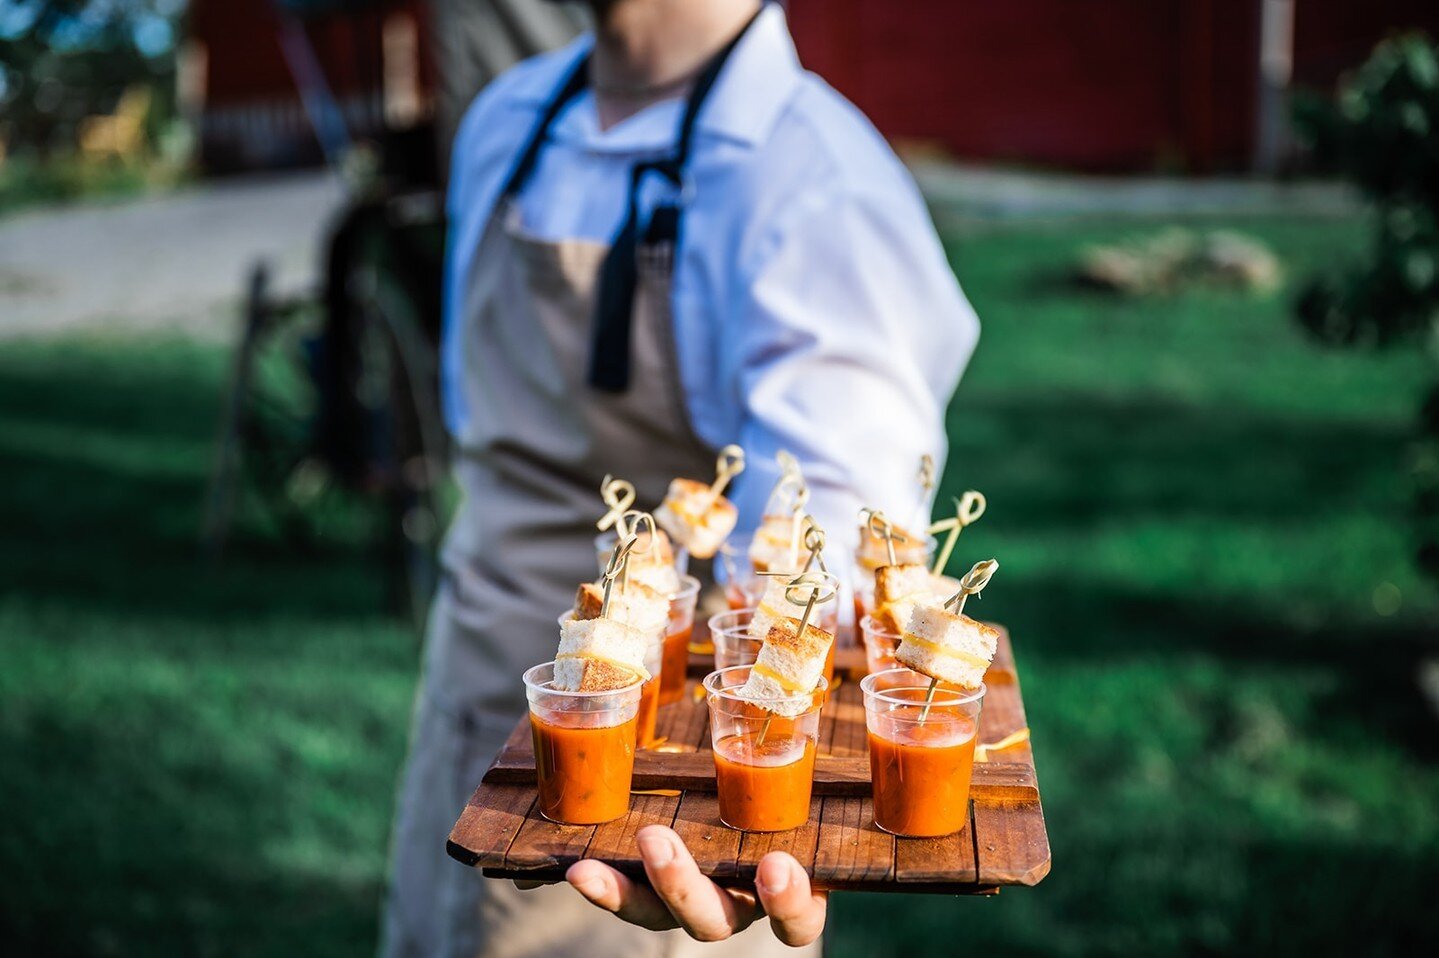 Farm to table wedding! At Blenheim, we grow most of our own ingredients, and some greens are harvested just minutes before your wedding reception. Here are heirloom tomato shooters with grilled cheese for cocktail hour.⁠
Photographer: Kalz Photograph